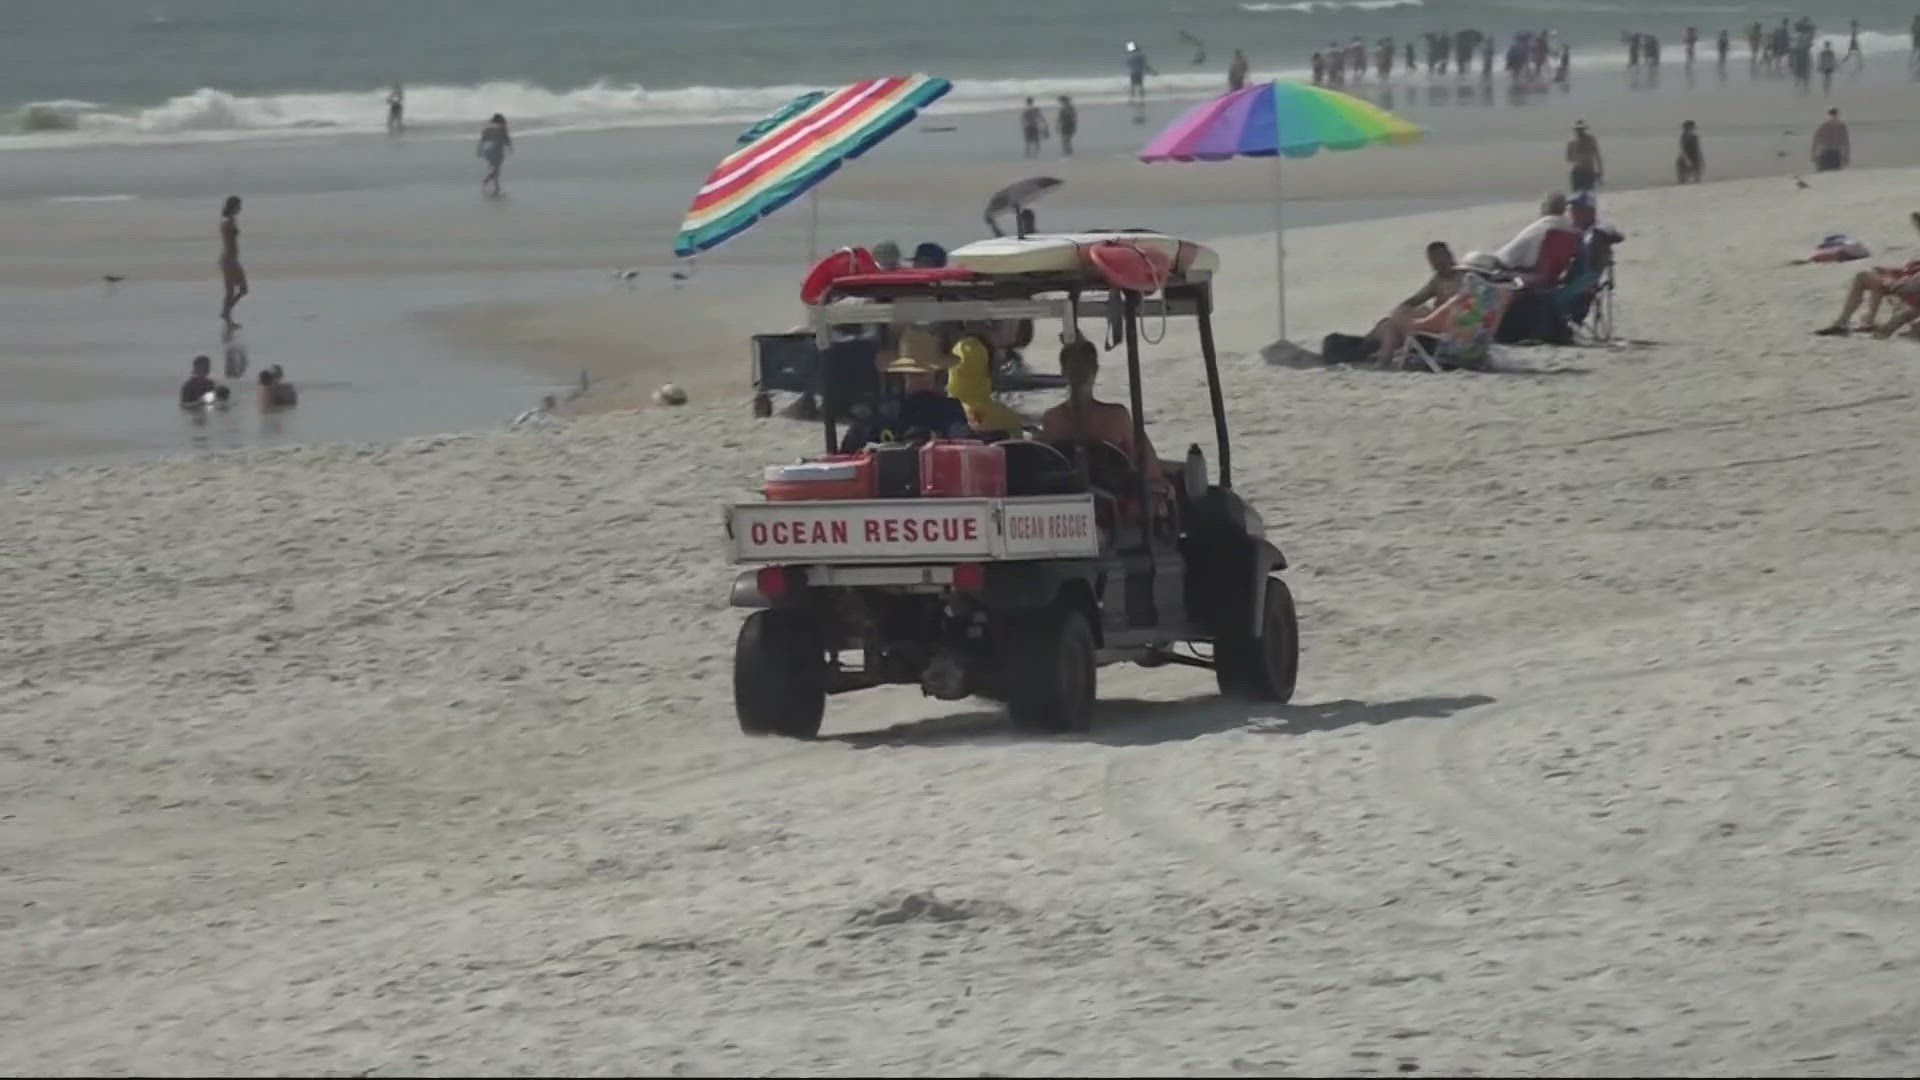 A Jacksonville Beach Ocean Rescue captain says the 4th of July is a top holiday for children to get separated from their parents at the beach.